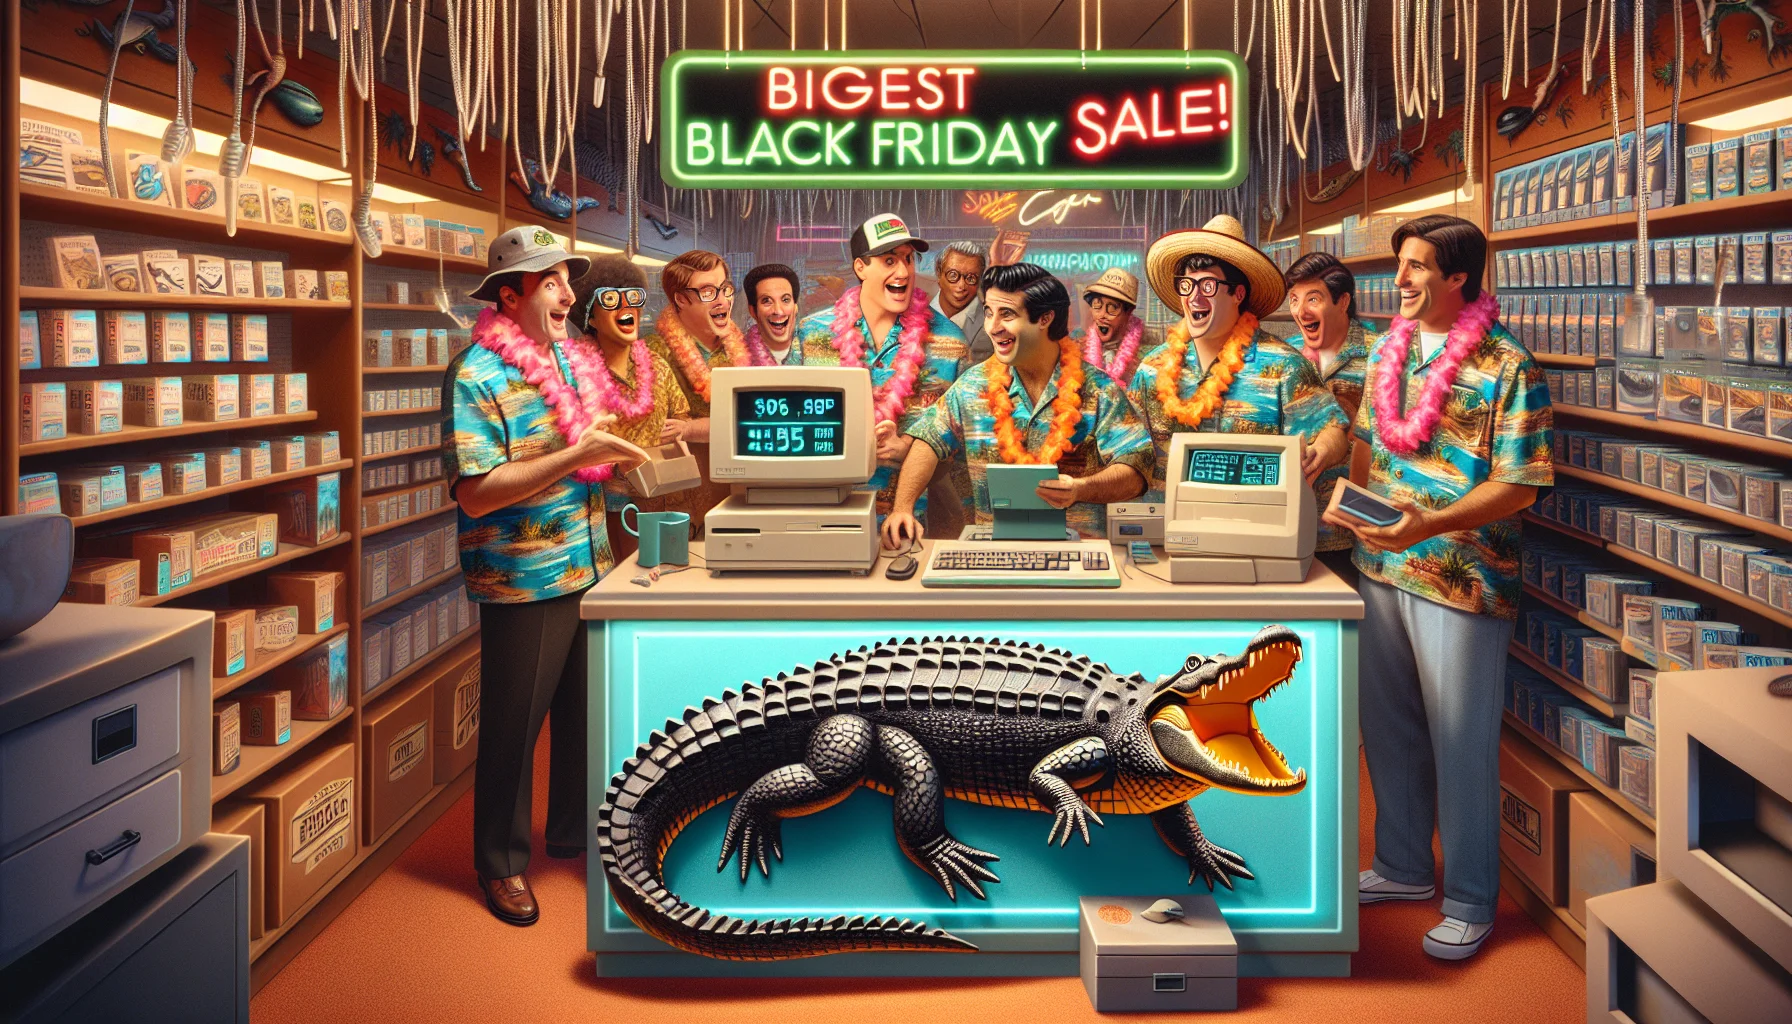 Visualize an amusing scenario representing Black Friday sales specific to a web hosting service. Picture this: a group of Hawaiian-shirted web developers, of varying descents such as Hispanic, Caucasian, and South Asian, are excitedly clustered around a gator-shaped counter. They're shopping at an internet-themed store, with gator-shaped USBs, funny mousepads with tech puns, and glowing ethernet cables dangling from the ceiling like vines. The counter has an old-fashioned cash register displaying significant discounts. The sign above reads 'Biggest Black Friday Sale!' in funky neon letters. The image should stir the feeling of enticement for web hosting deals.